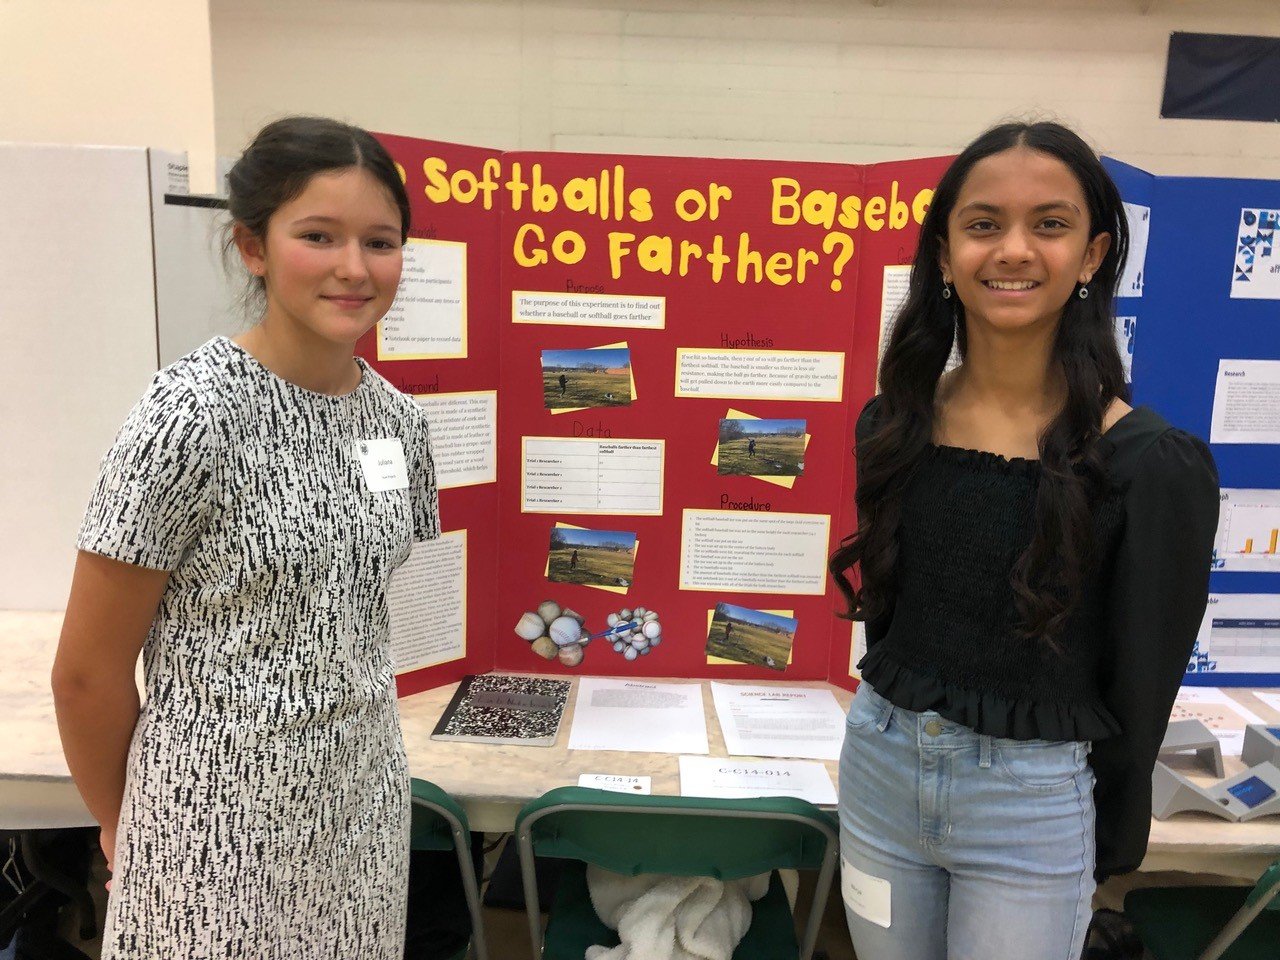 Juliana Gatt and Nirja Patel, who attend Sol Feinstone Elementary School in Upper Makefield, clearly show through their project that baseballs go farther than softballs because of their internal makeup.